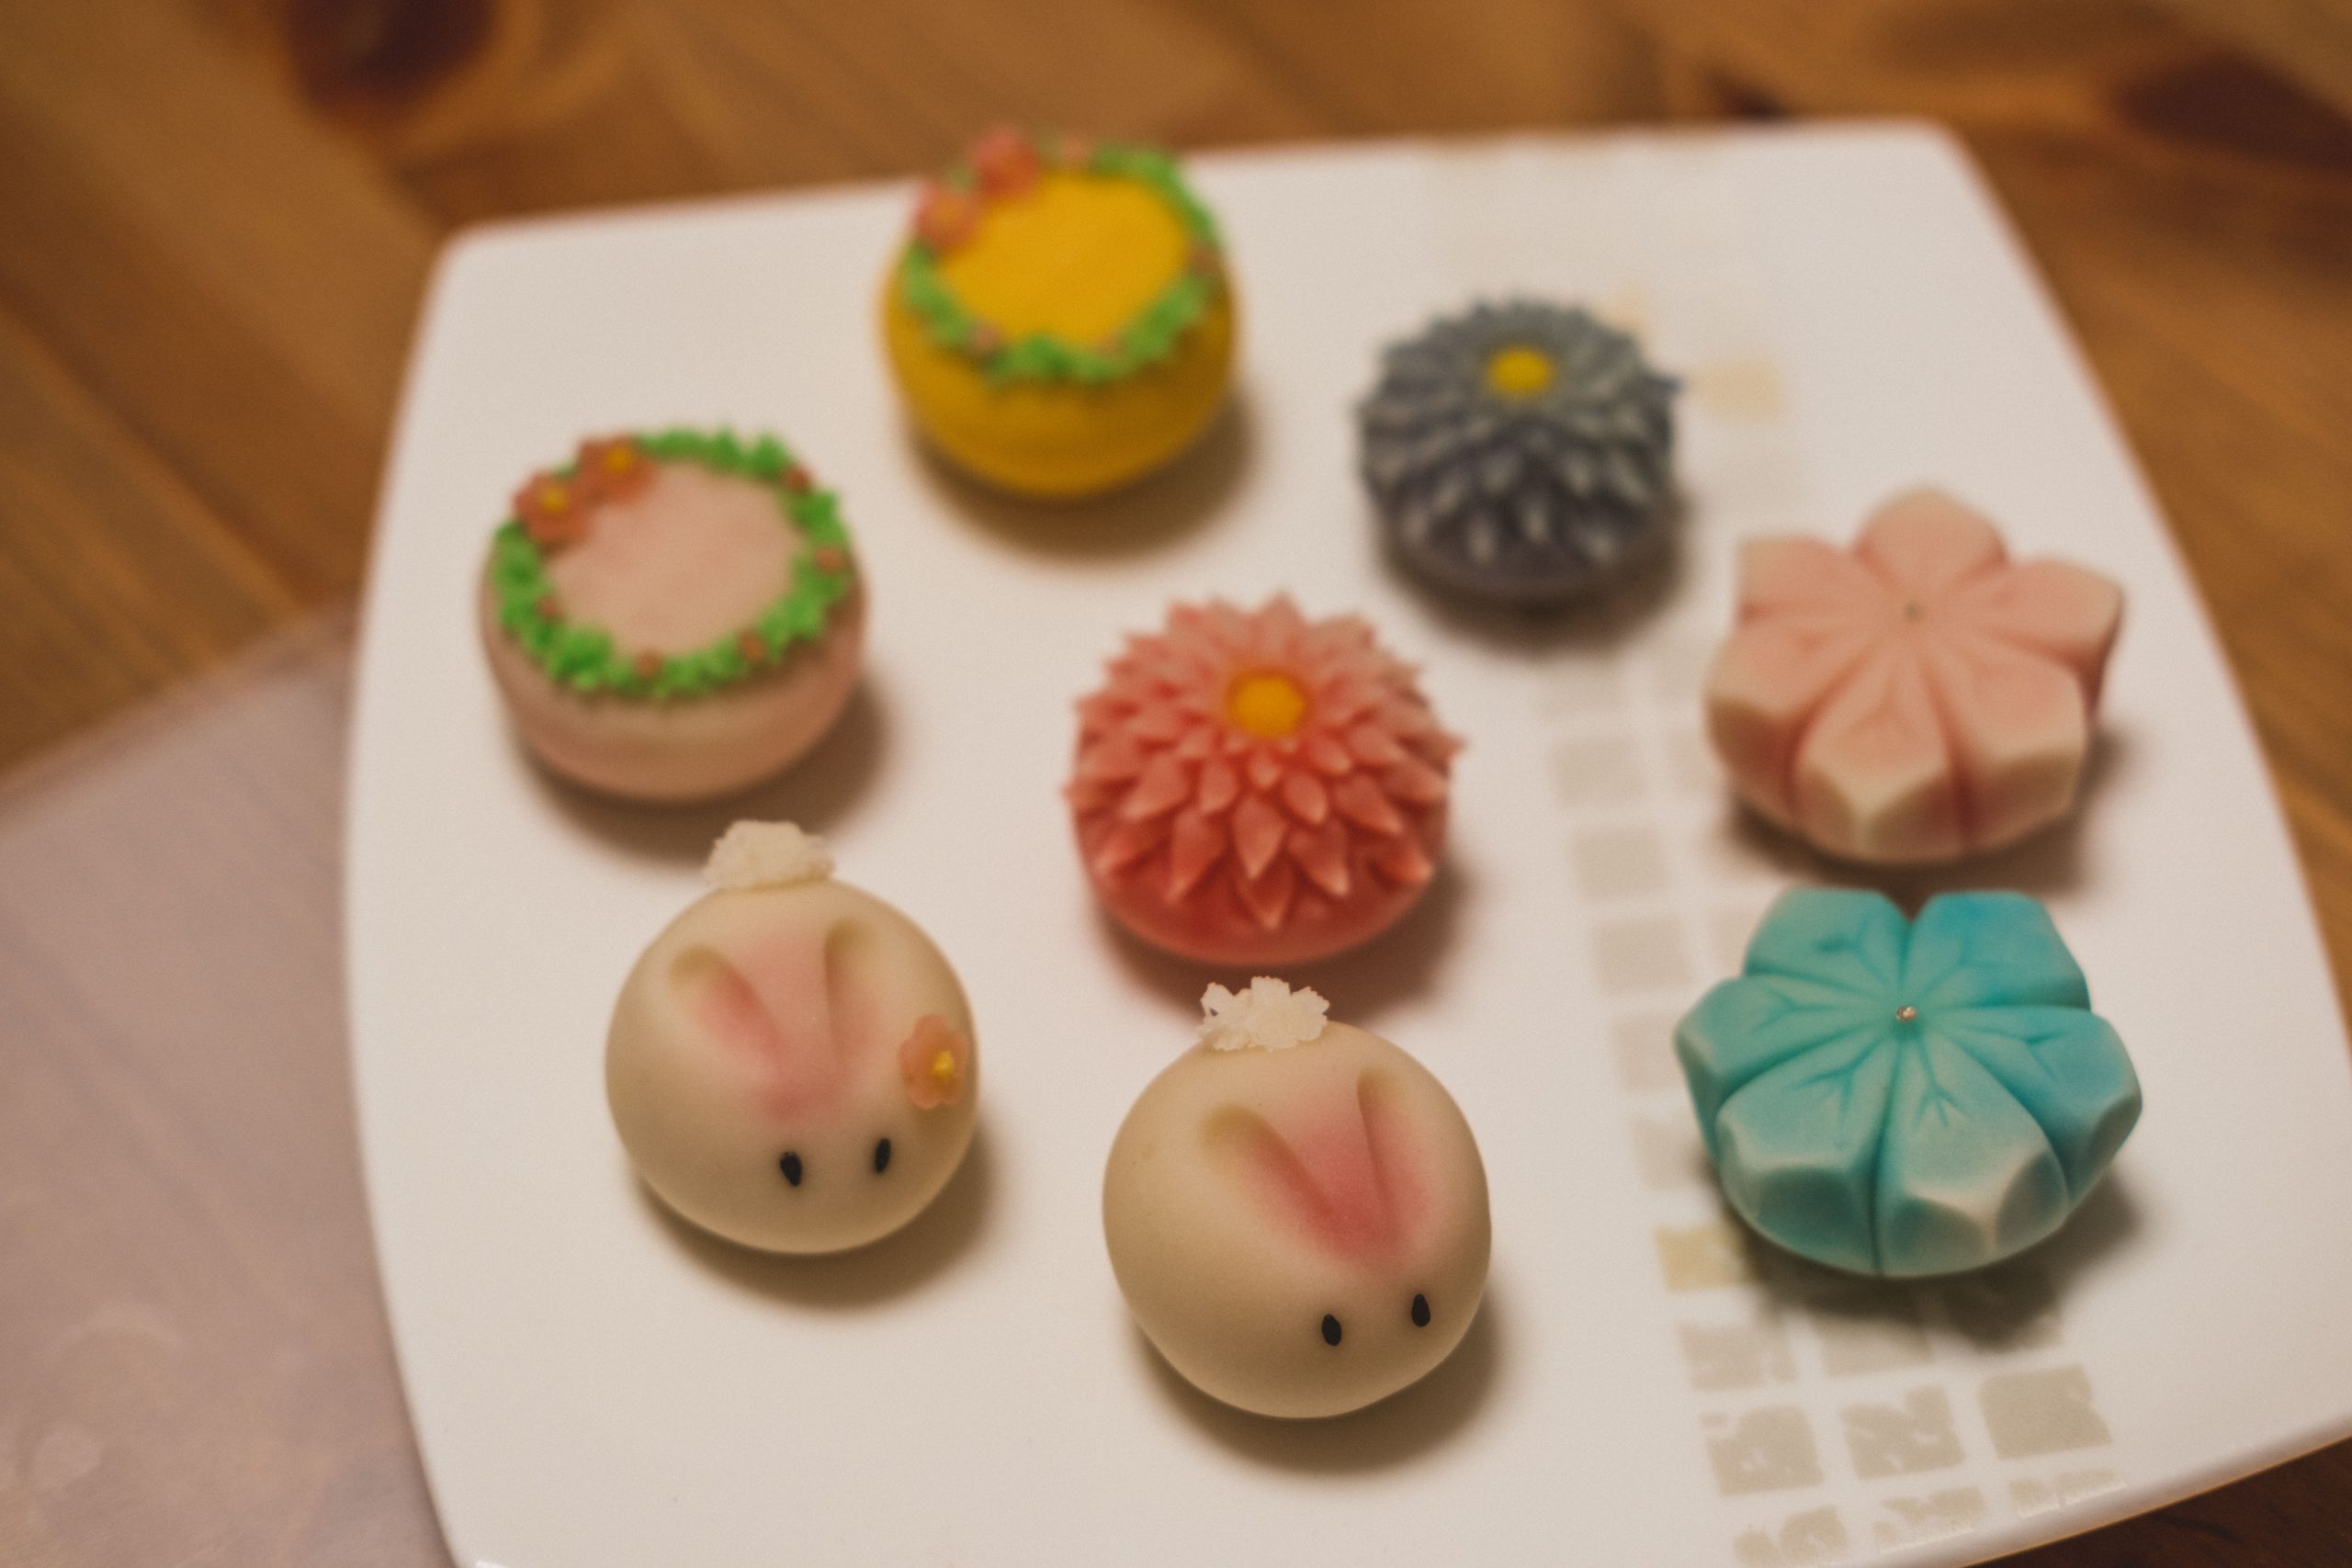 My wagashi during the wagashi cooking class in Tokyo